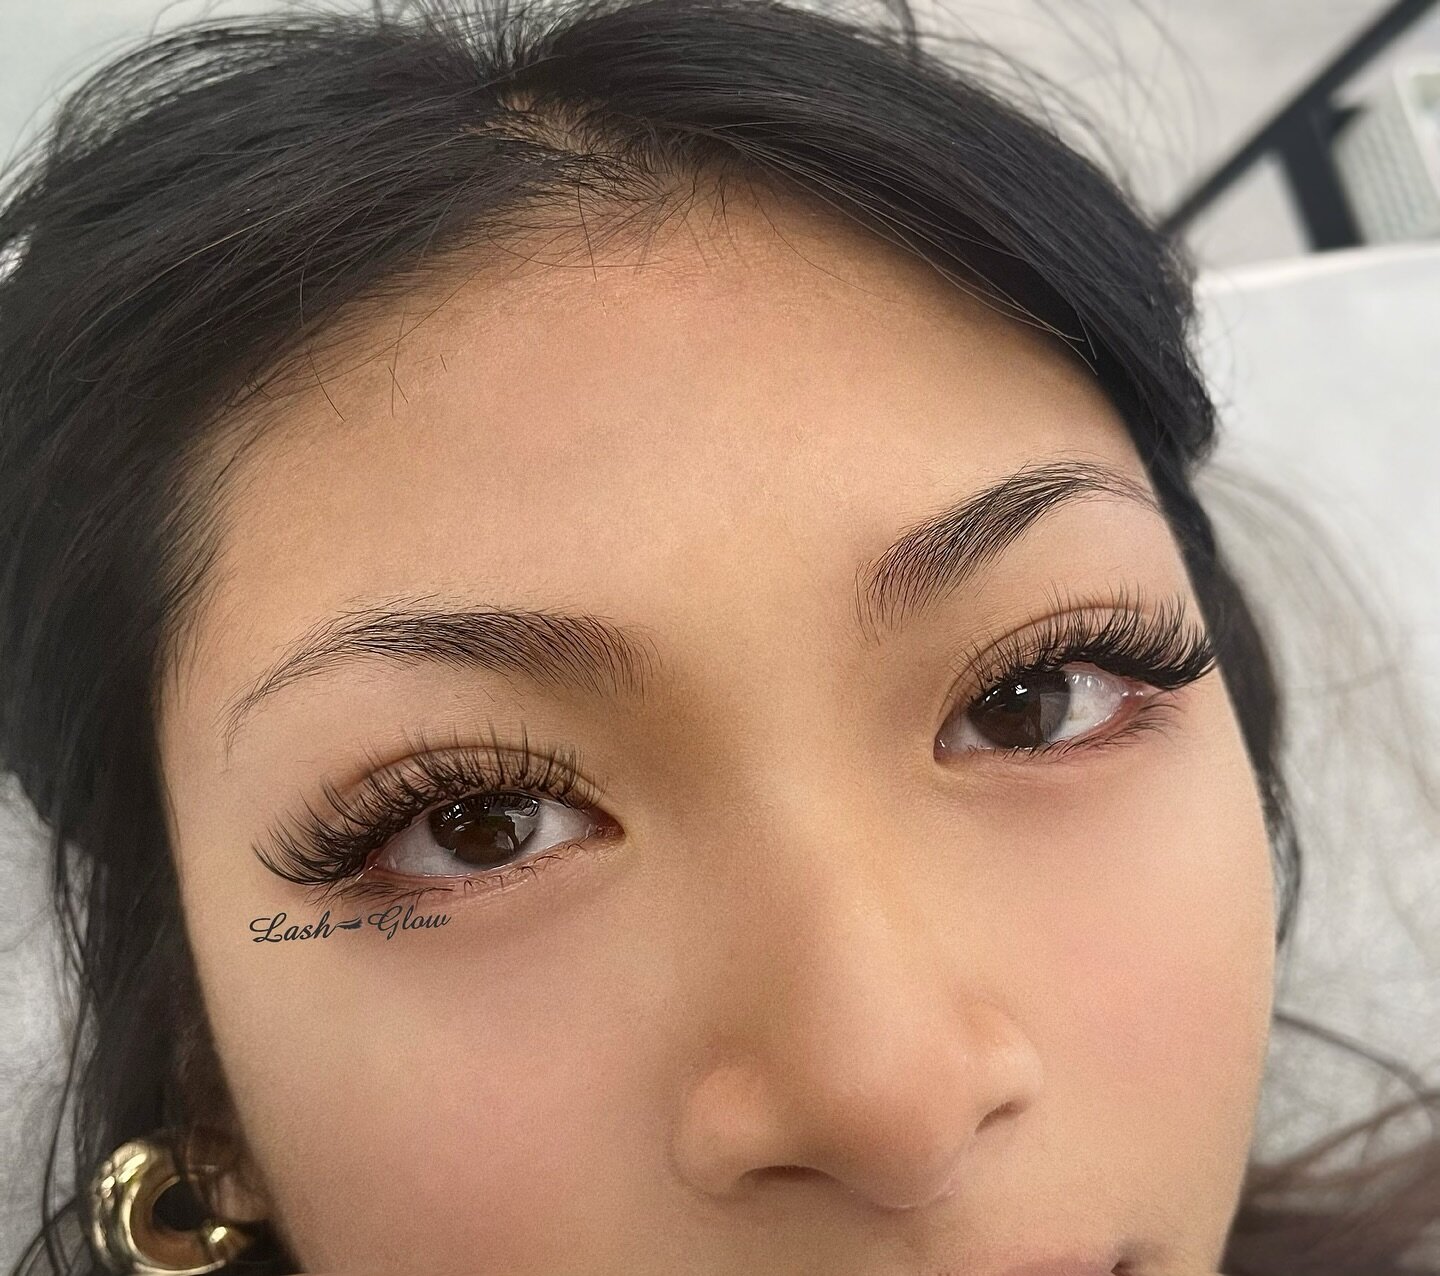 🌻3D Volume wispy 

DM, text or call 📱 626-8998262 for appointment 

📍Pasadena Location 
641 N Lake Ave, Pasadena, CA91101

📍San Gabriel Location 
8808 E Las Tunas Dr, 
San Gabriel, CA91776

#lashextensions #pasadenaeyelashextensions
#pasadenacali